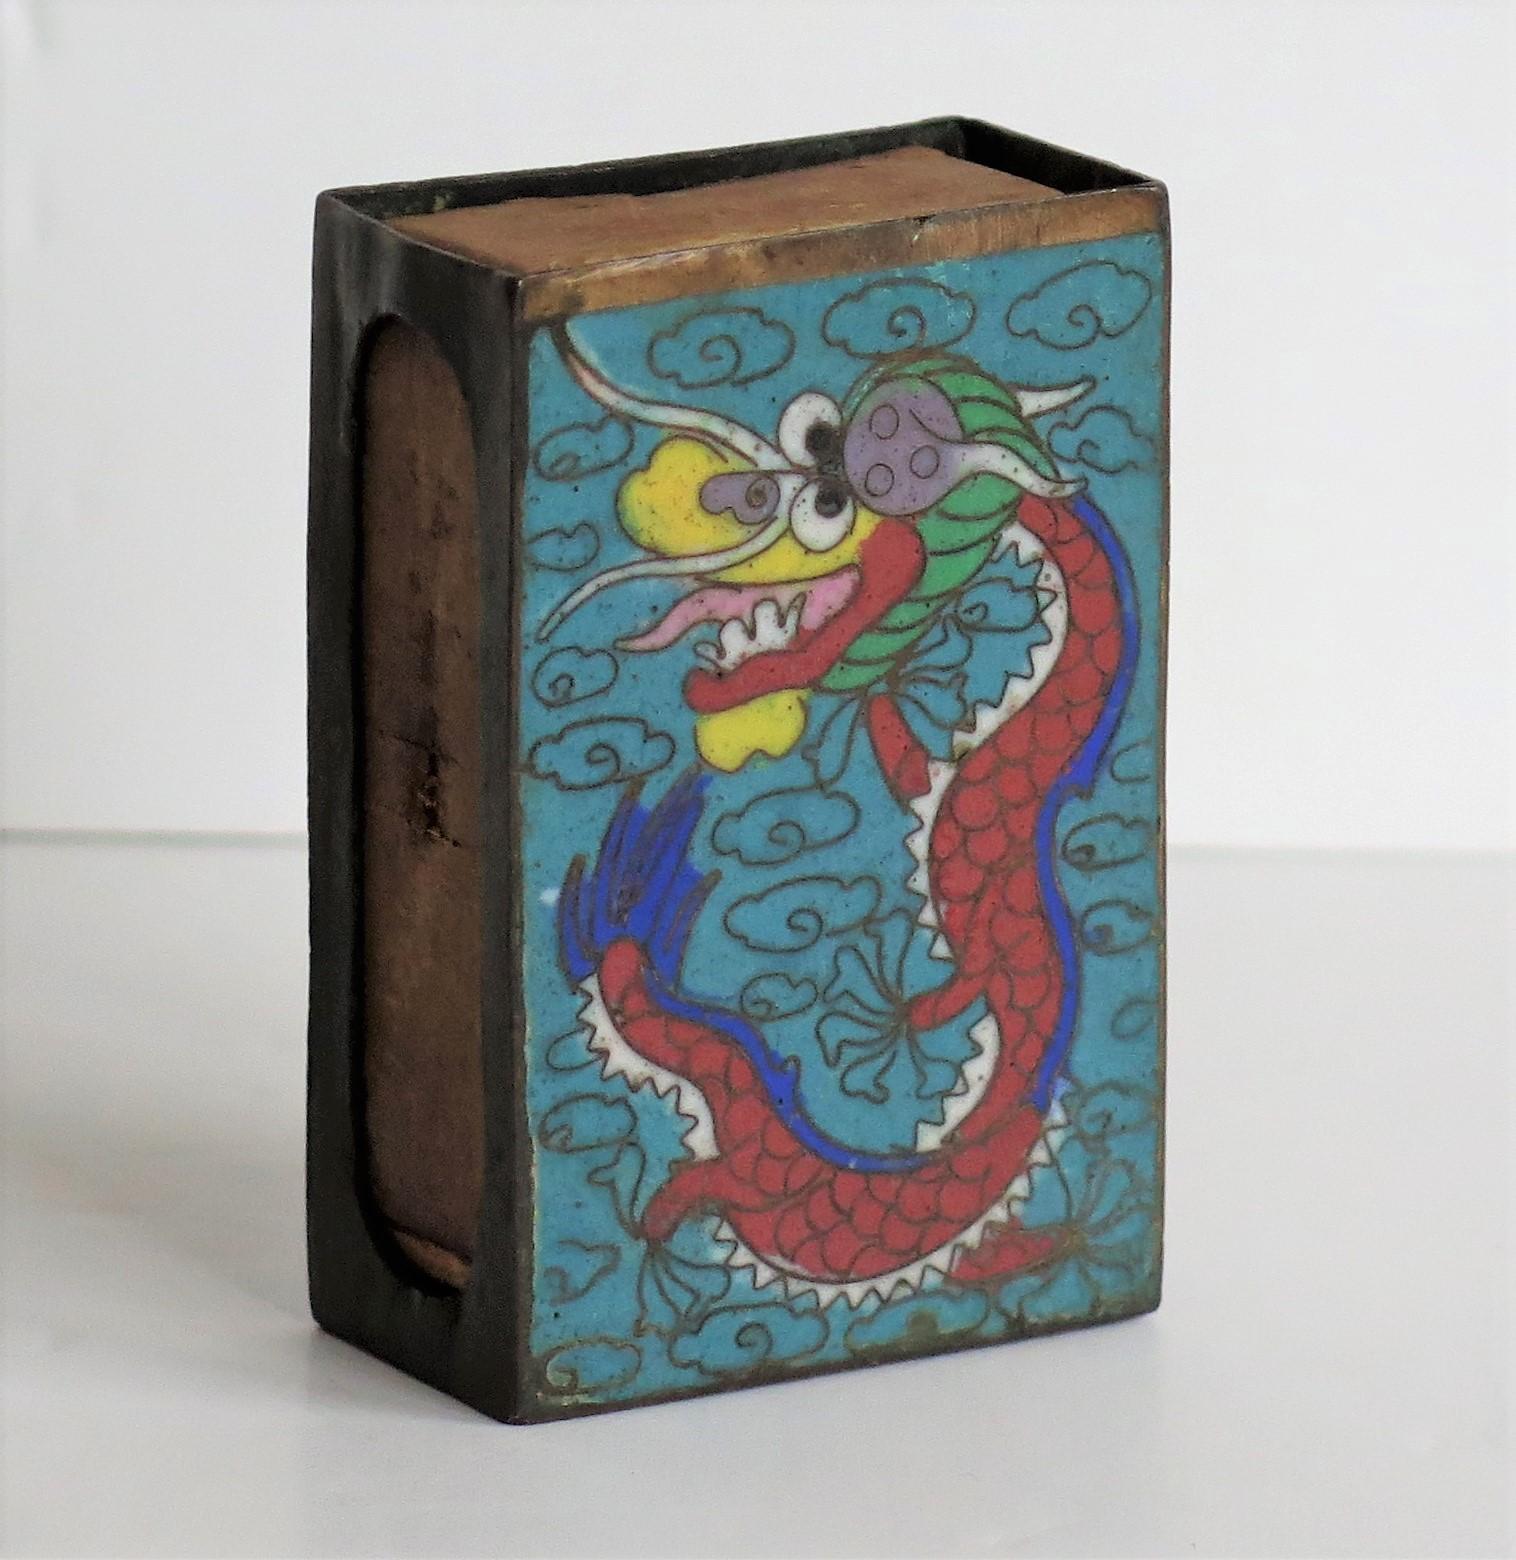 This is a good Chinese Cloisonné Vesta match case with a sliding match box that we date to the later half of the 19th century of the Qing dynasty.

The Vesta case is rectangular with an end opening having a sliding wooden match box. The sides have